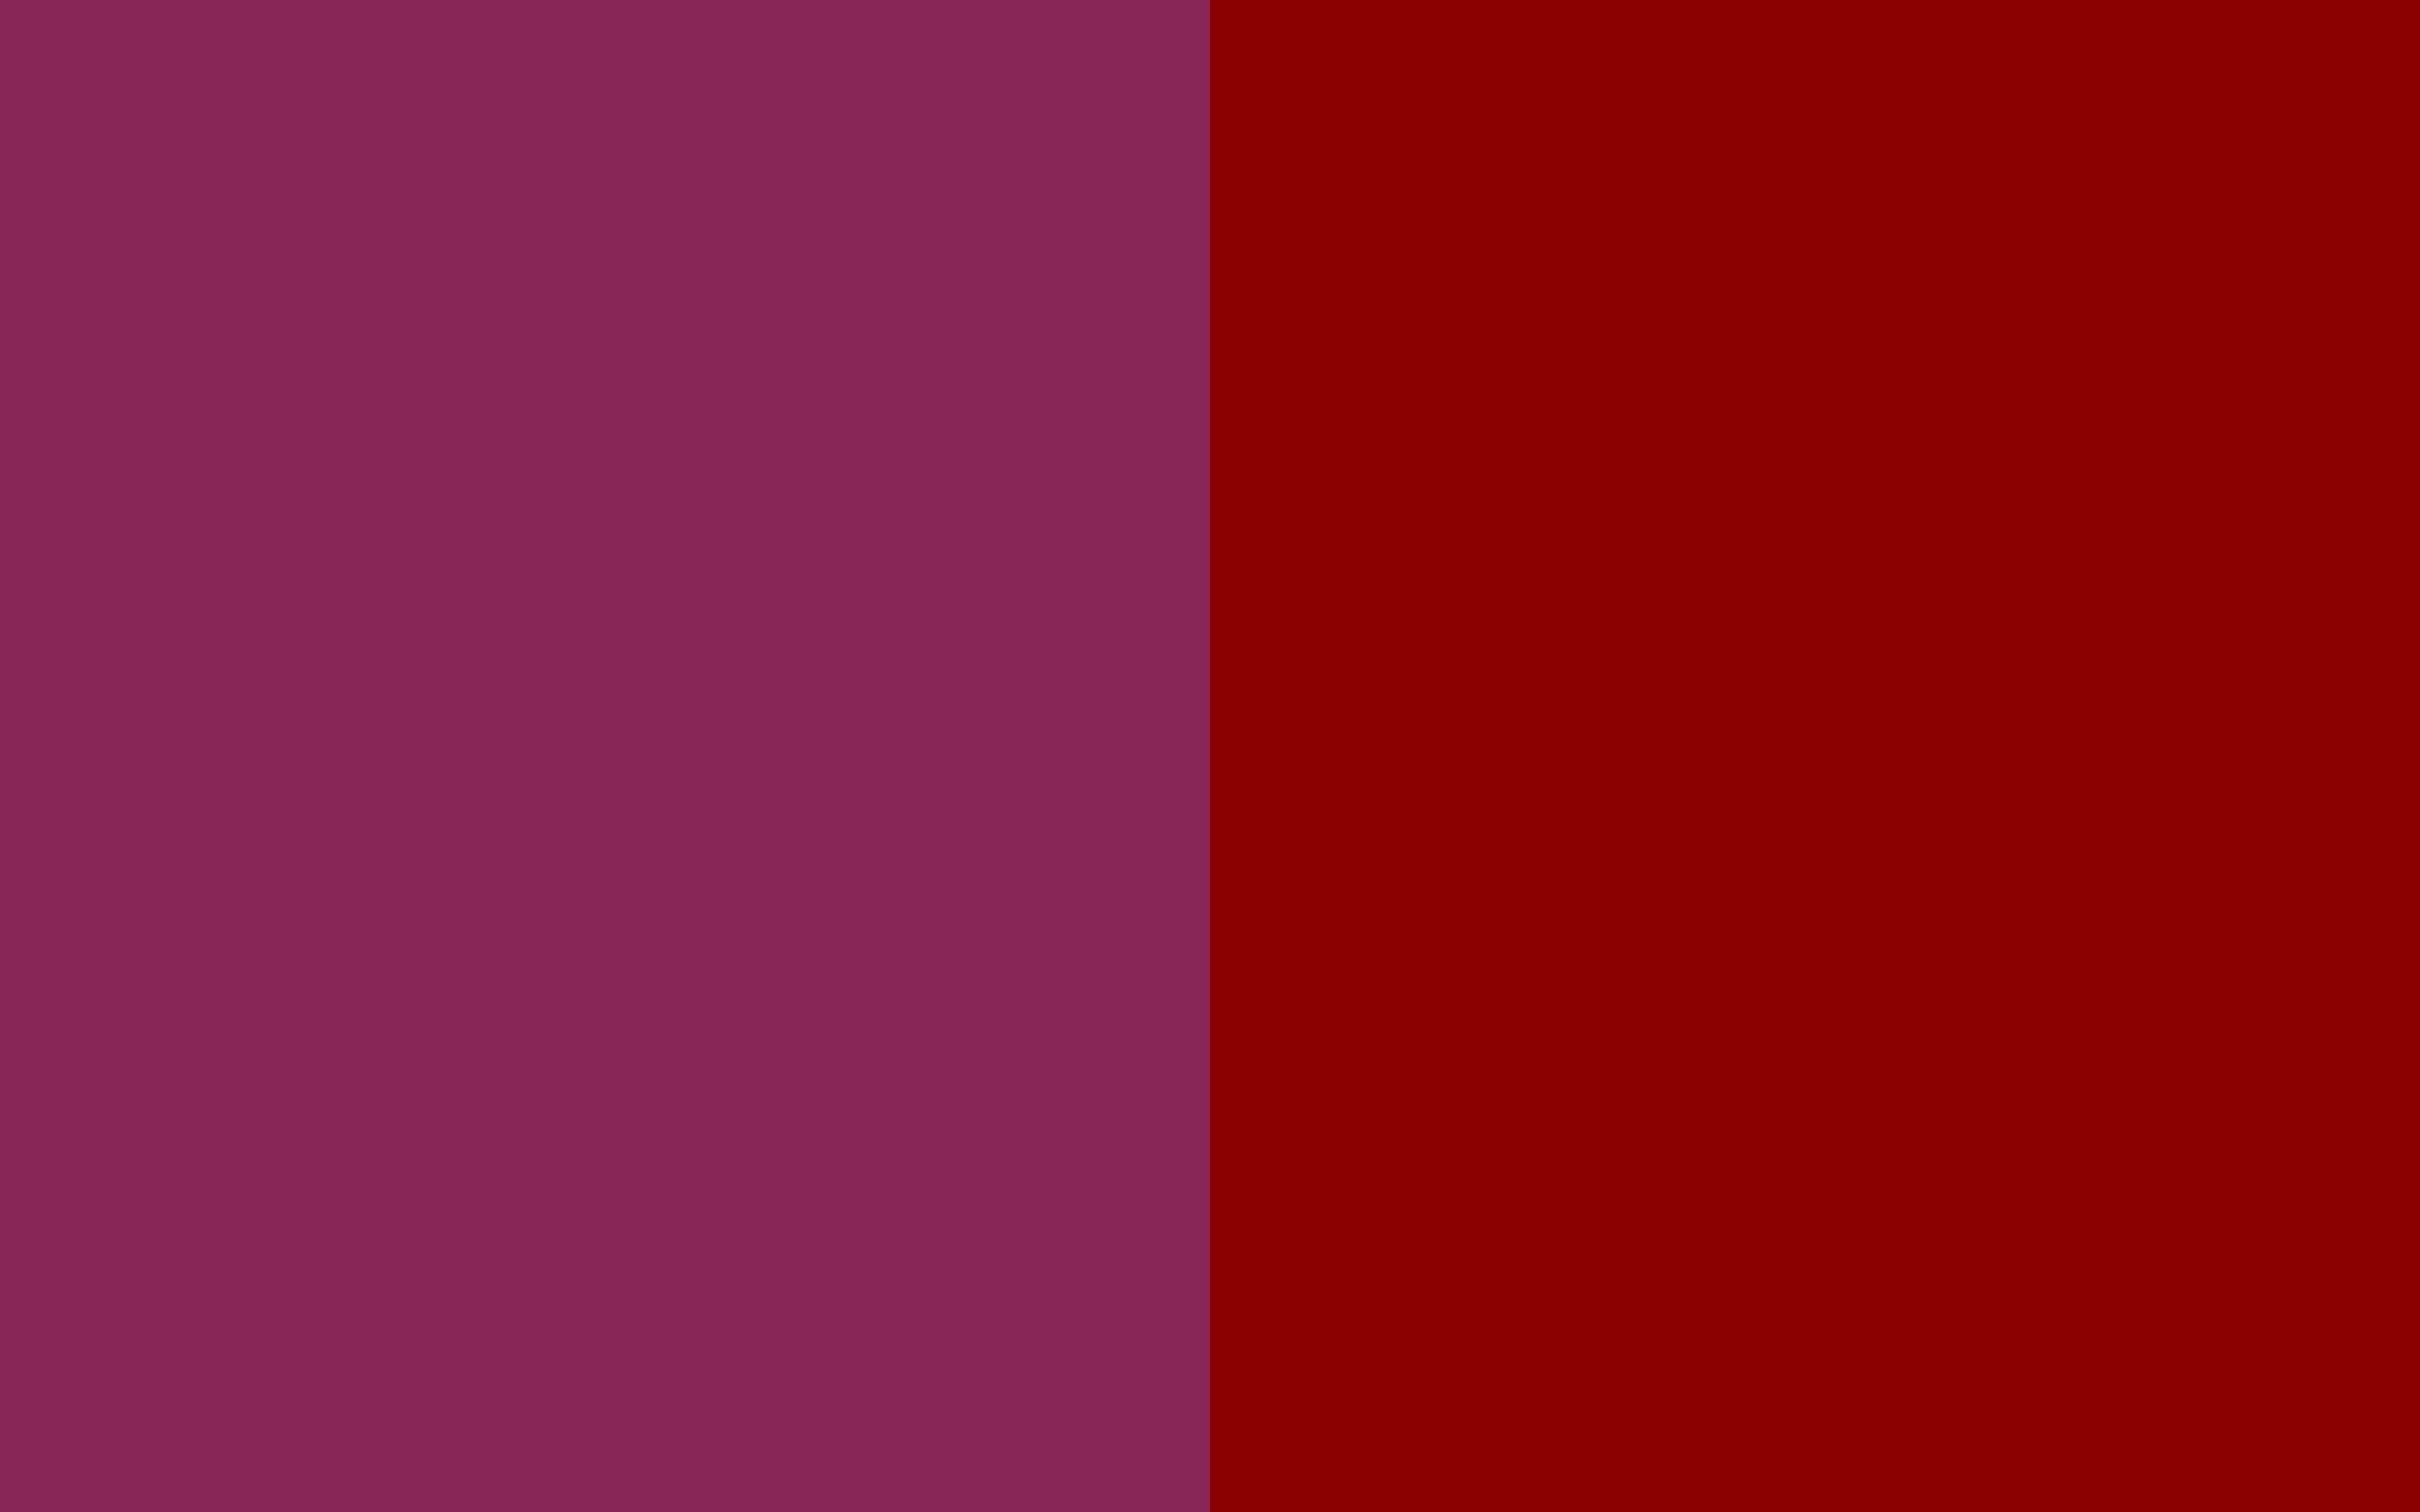 Dark Raspberry and Dark Red Two Color Background. Solid color background, Color, Background